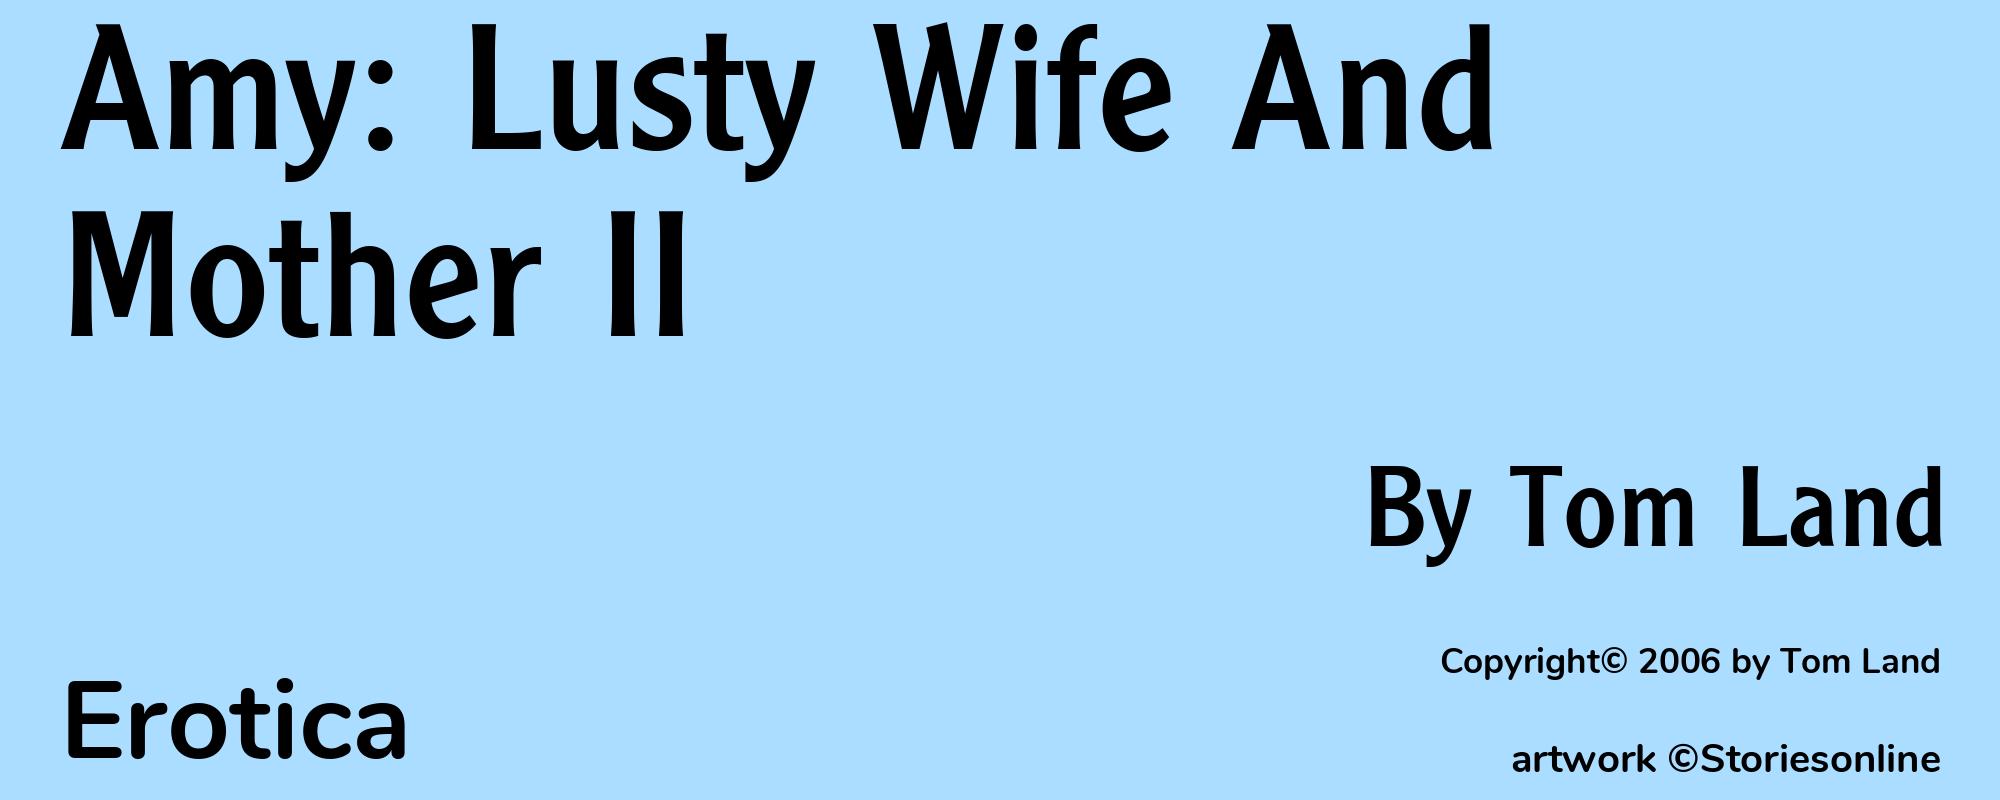 Amy: Lusty Wife And Mother II - Cover